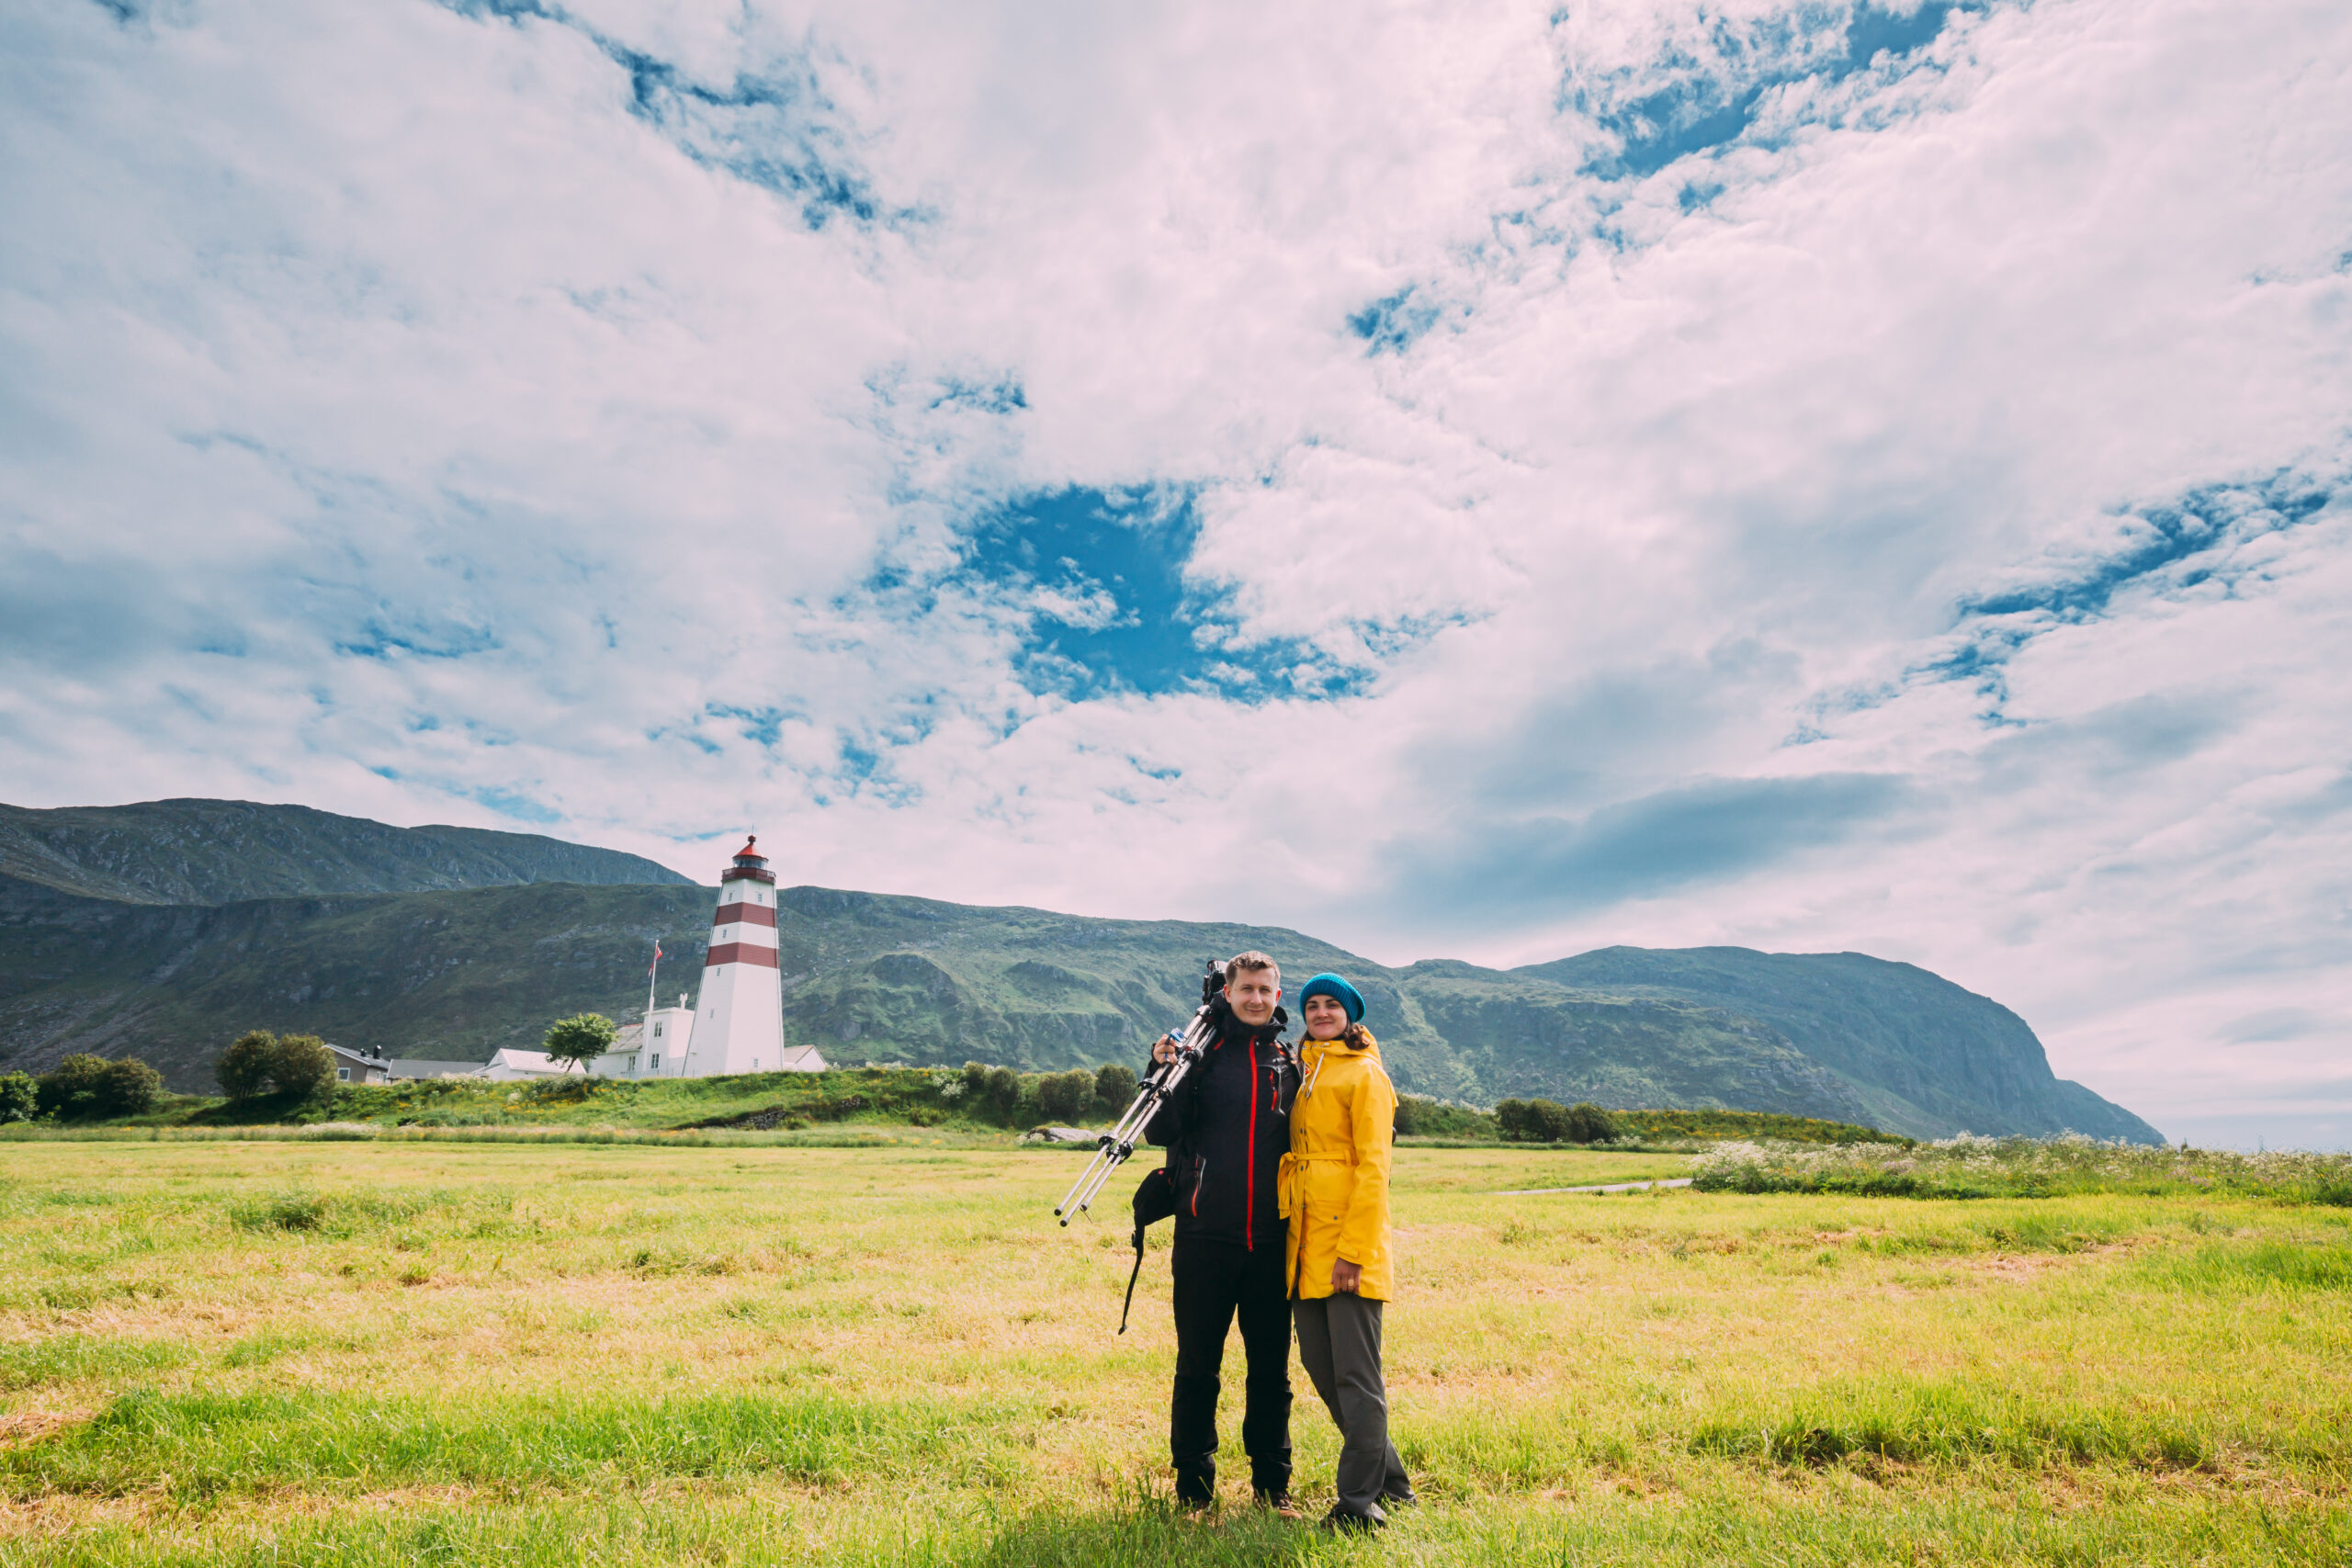 Man and woman standing together in front of a lighthouse with mountains in the background.